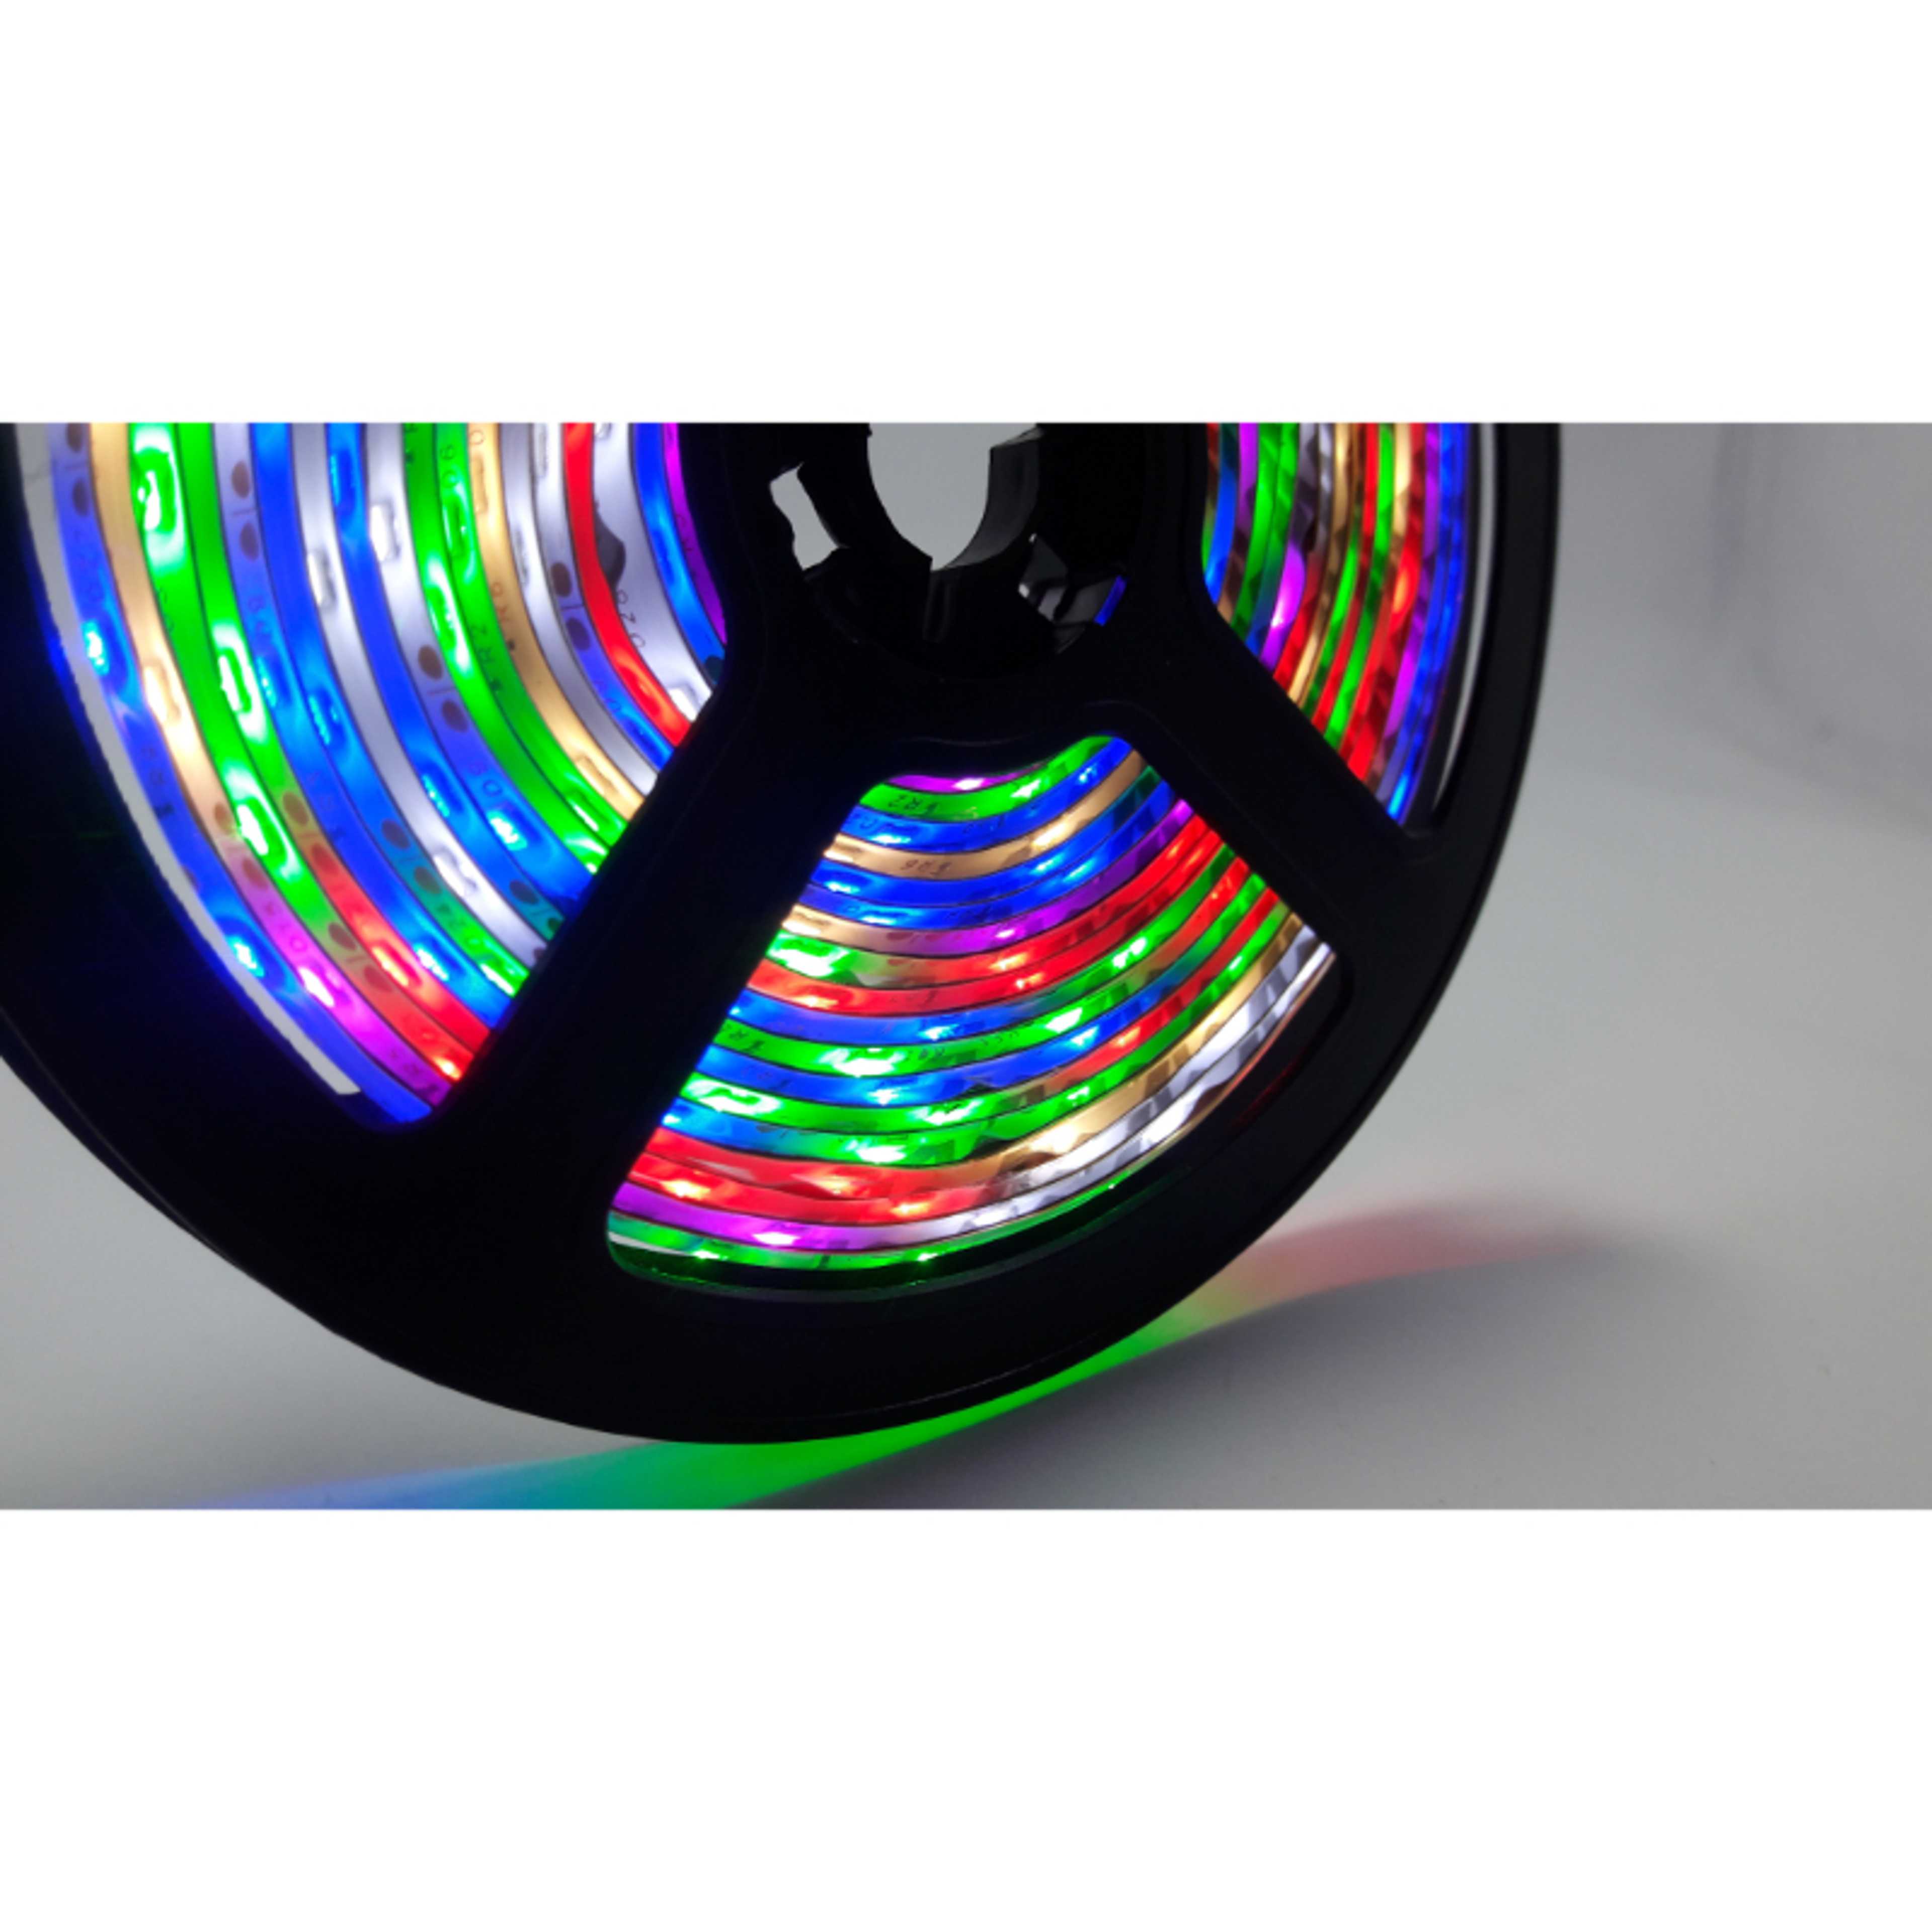 Rgb Led Strip Light Waterproof with adapter - Complete Kit